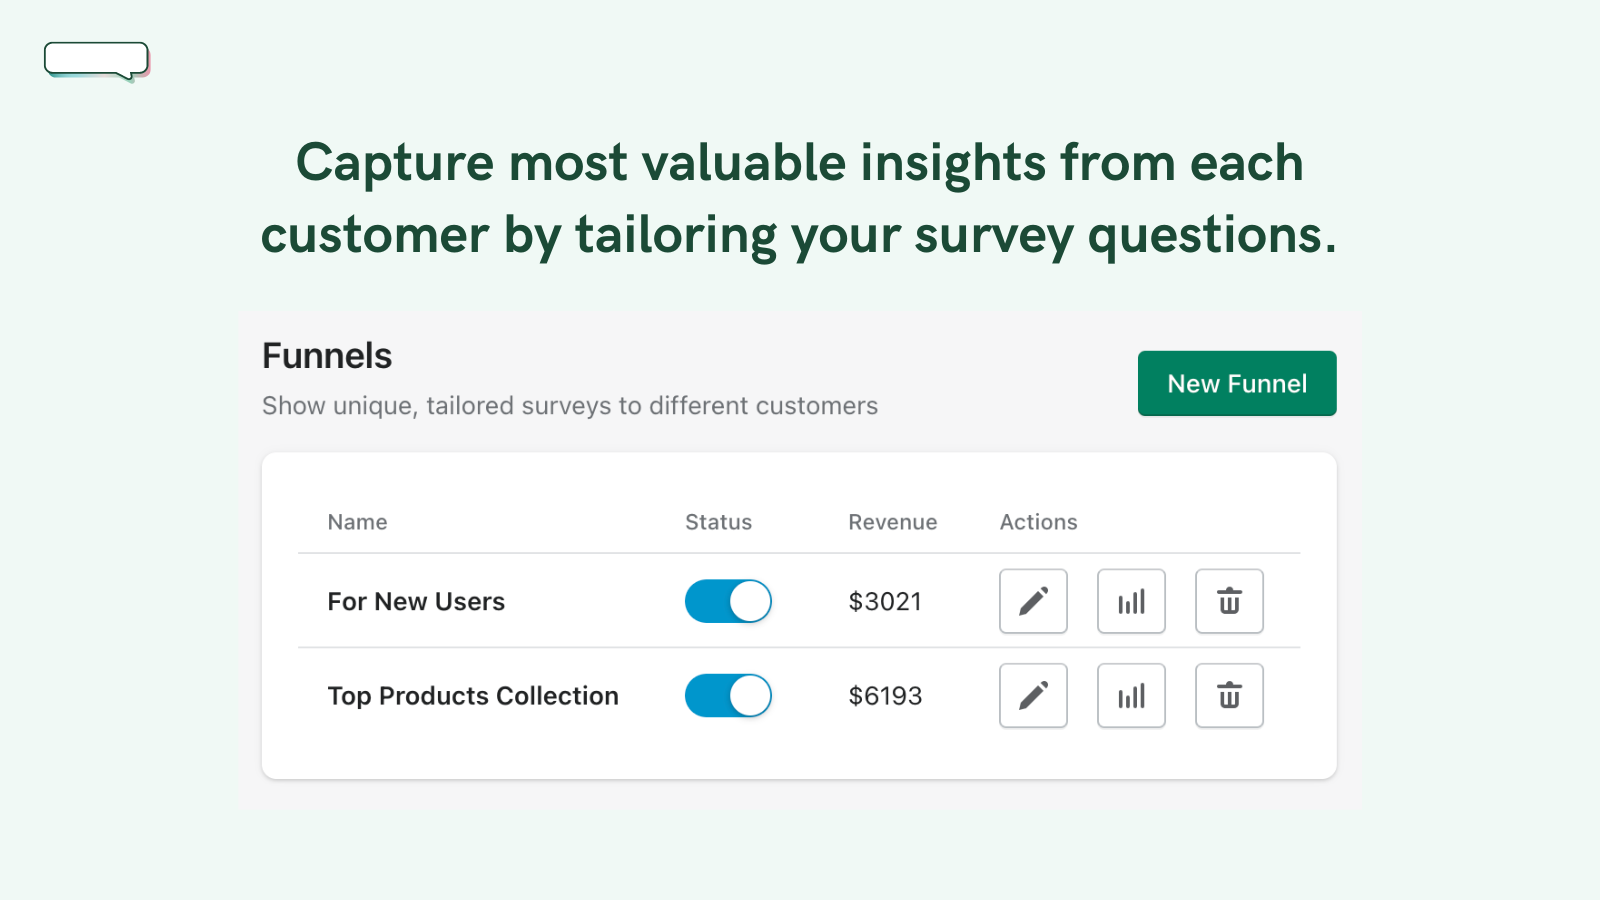 Ask questions tailored for each customer using funnels.